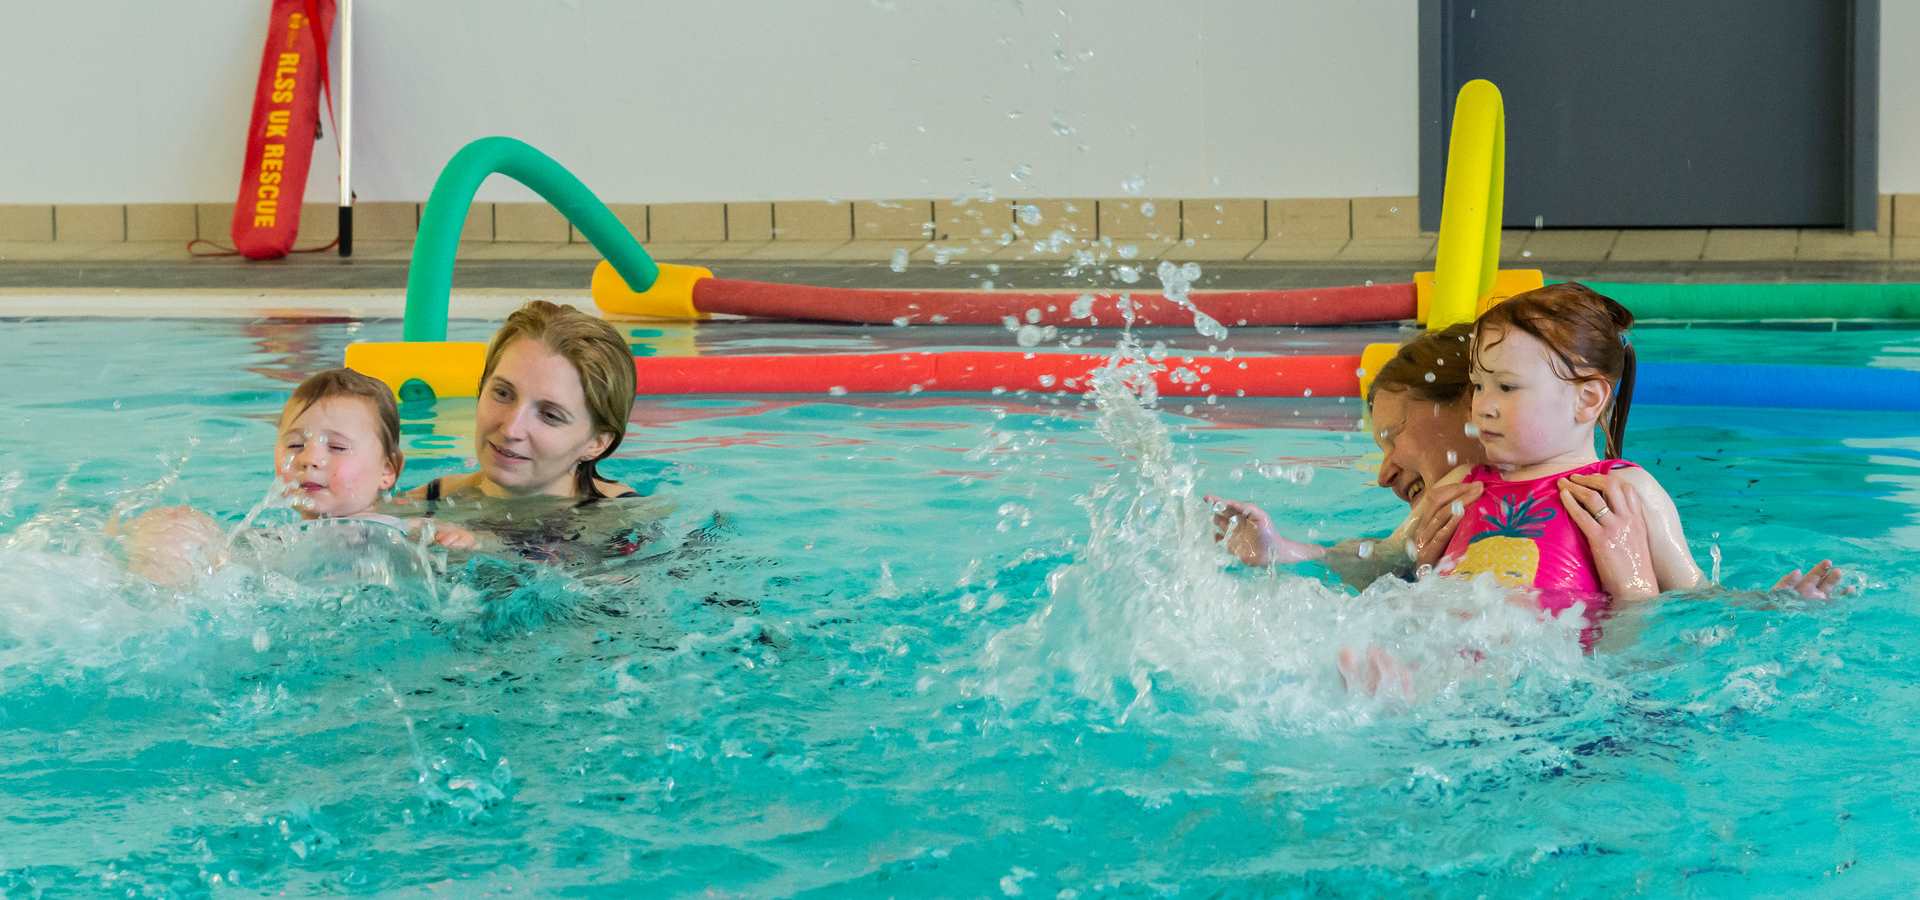 Two young children enjoy some swim lessons